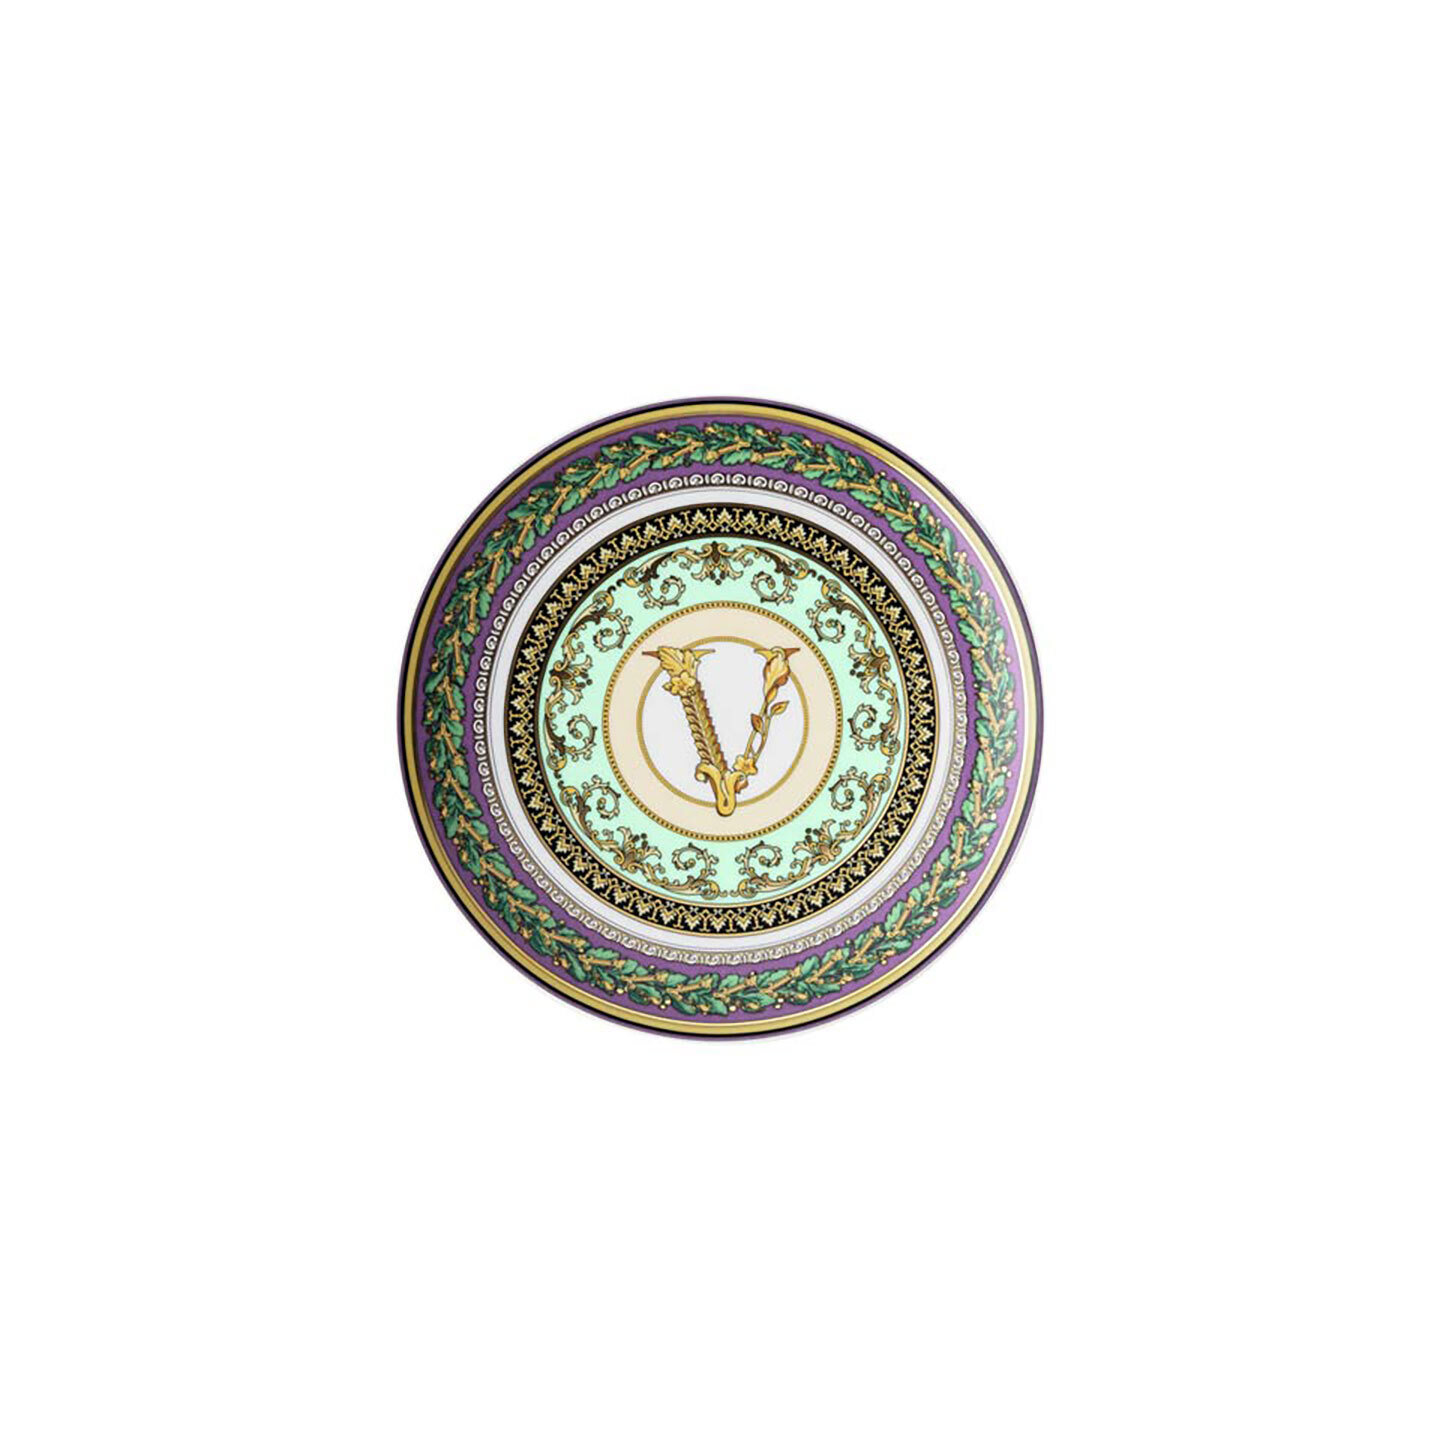 Versace Barocco Mosaic Bread &amp; Butter Plate 6 2/3 Inch